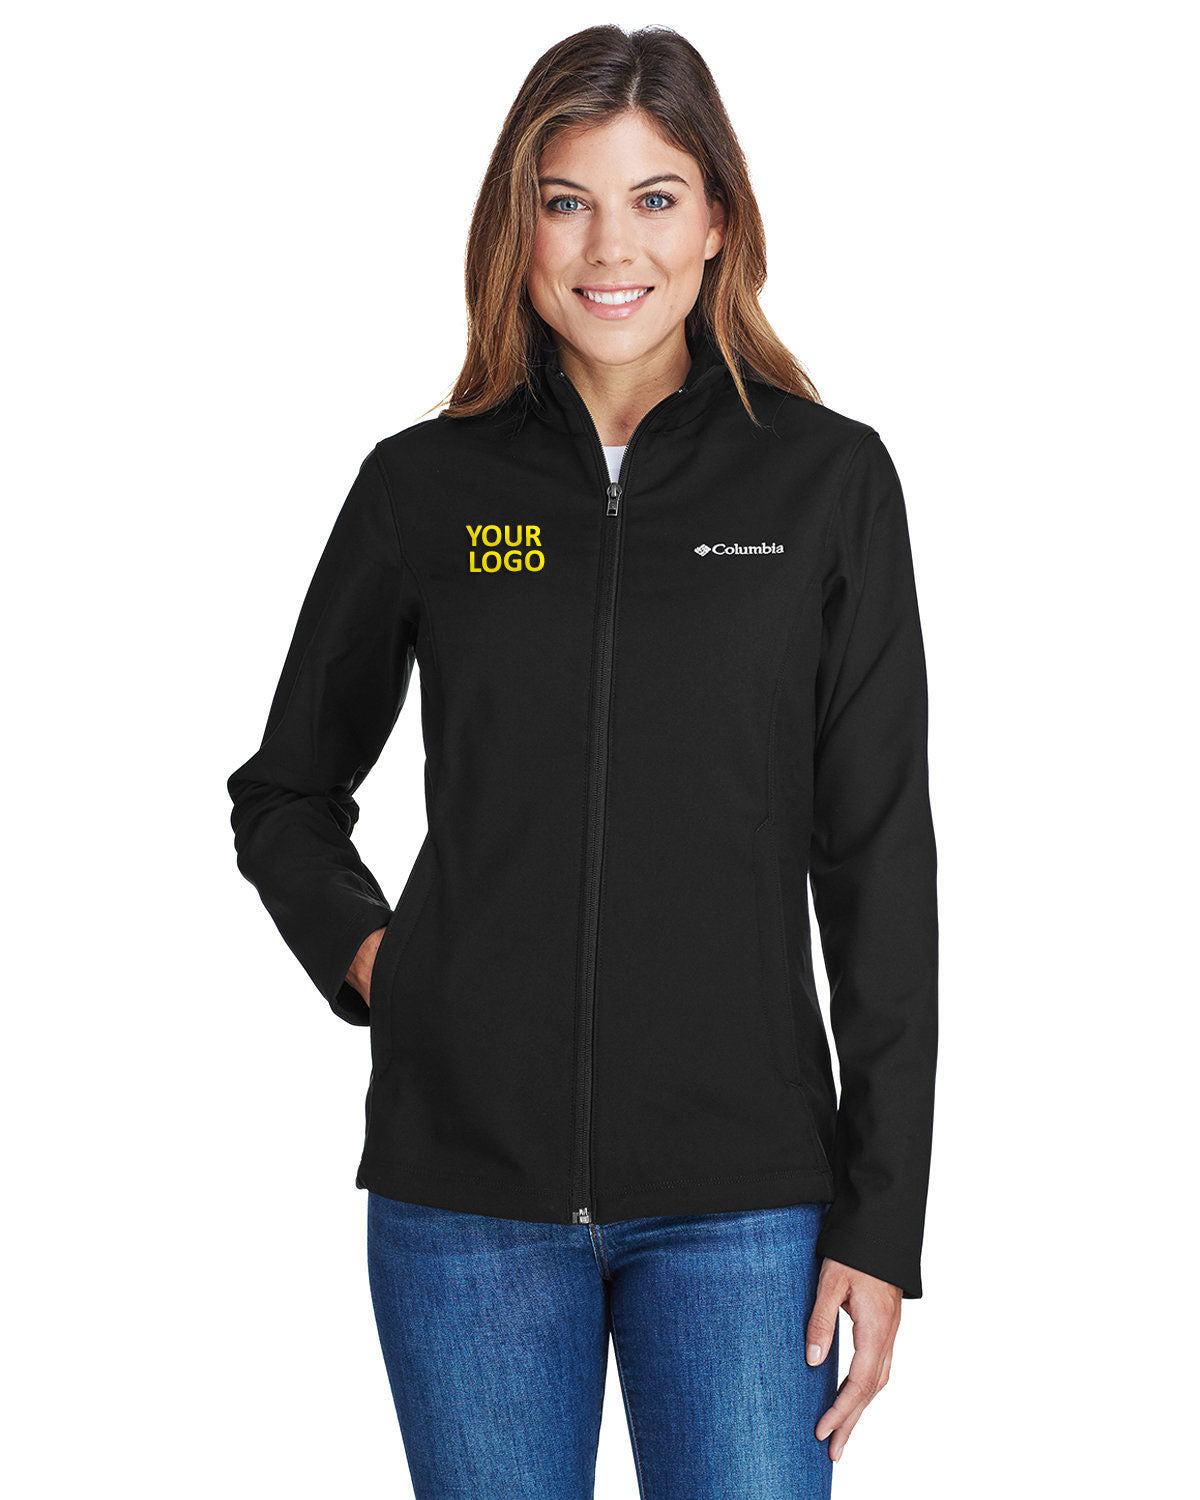 Columbia Black 5343 embroidered jackets for business